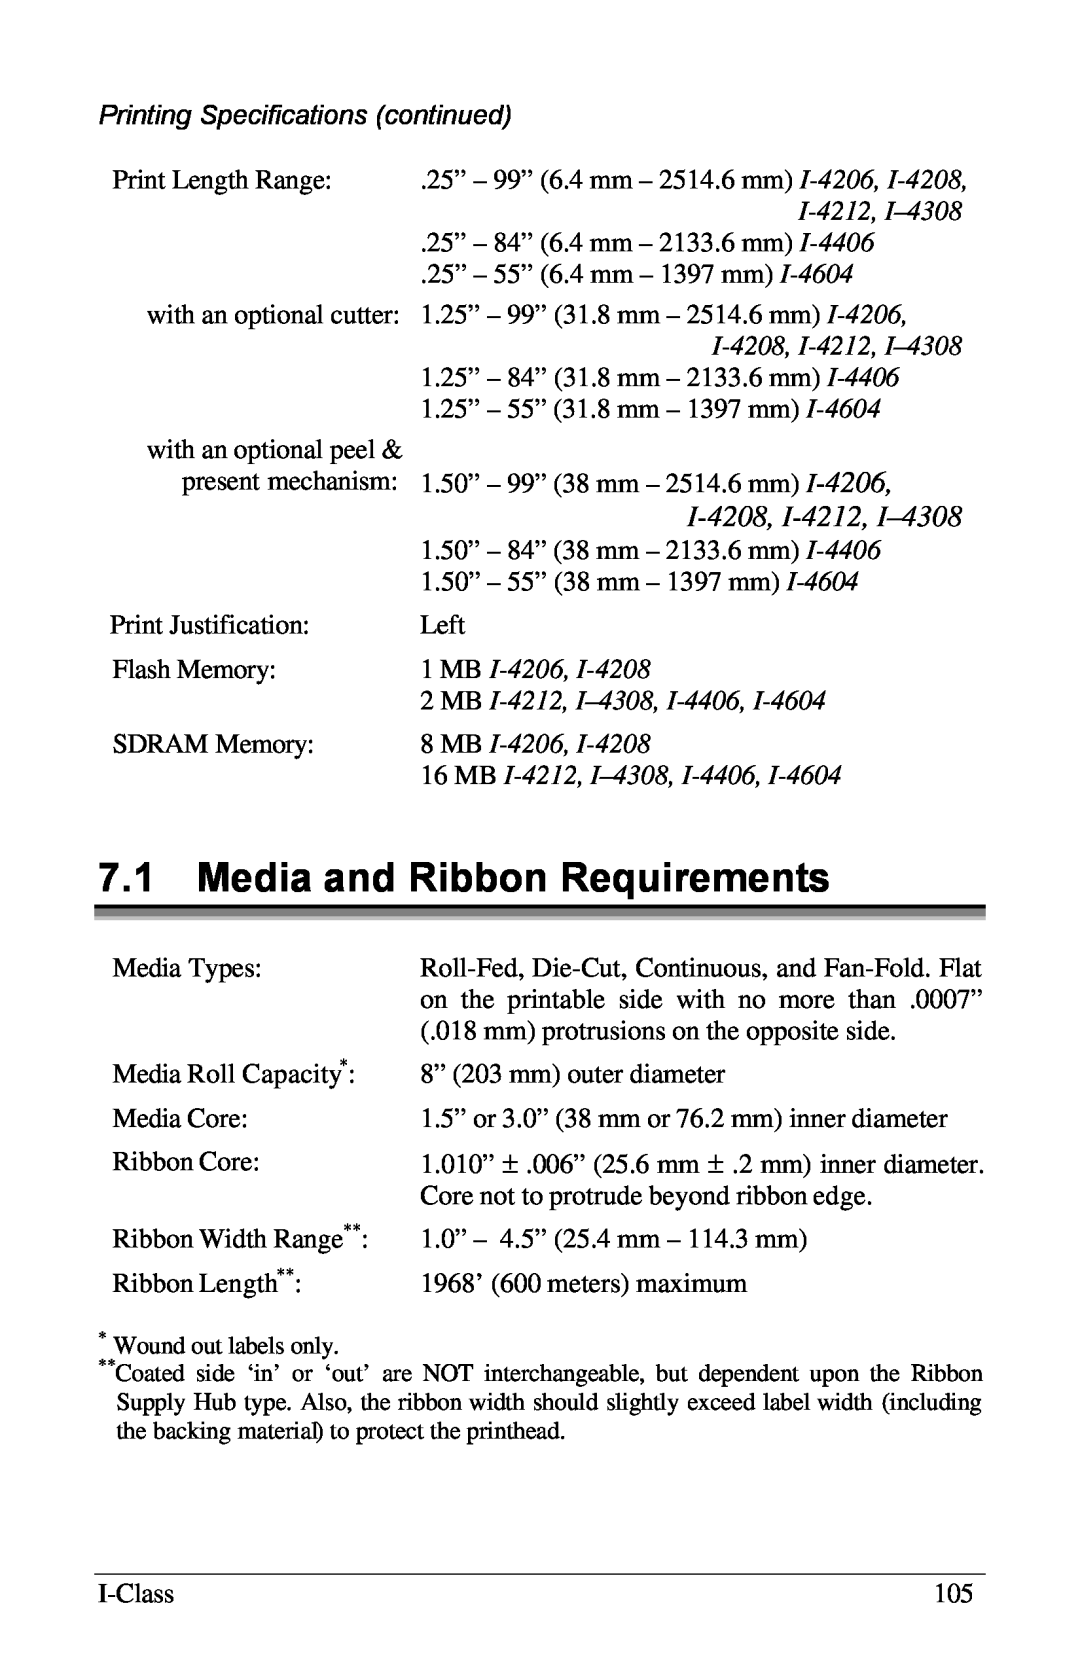 Xerox I Class manual 7.1Media and Ribbon Requirements, Printing Specifications continued, I-4212, I–4308, MB I-4206 